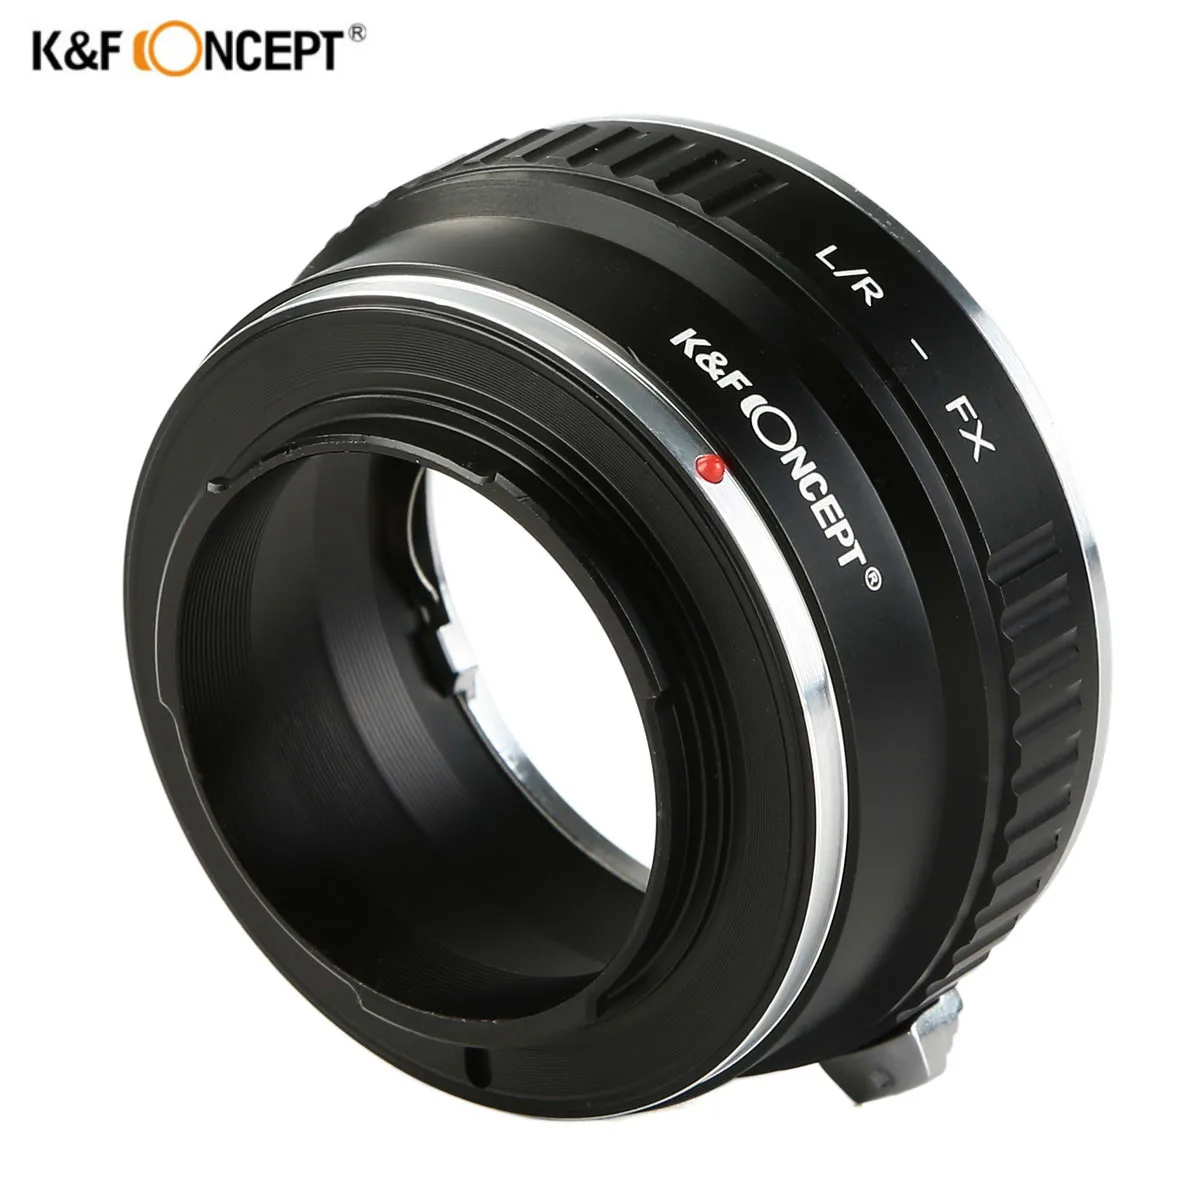 

K&F Concept L/R-FX Lens Mount Adapter Ring For Leica R Mount Lens to Fujifilm FX Mount Camera Adapter